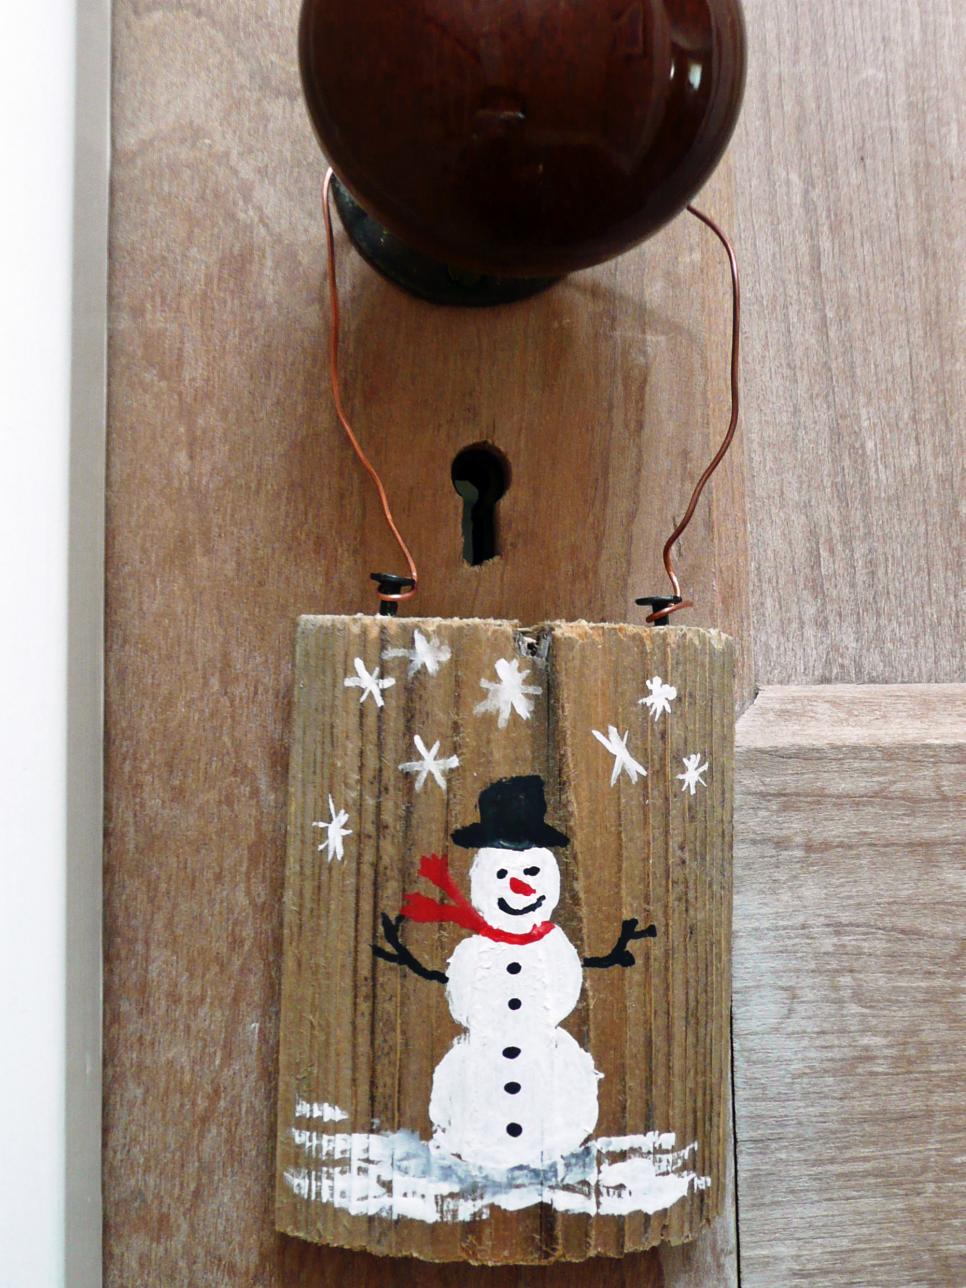 19 Rustic Christmas Decorations Made Inexpensively From ... diagram of electrical wiring in home 